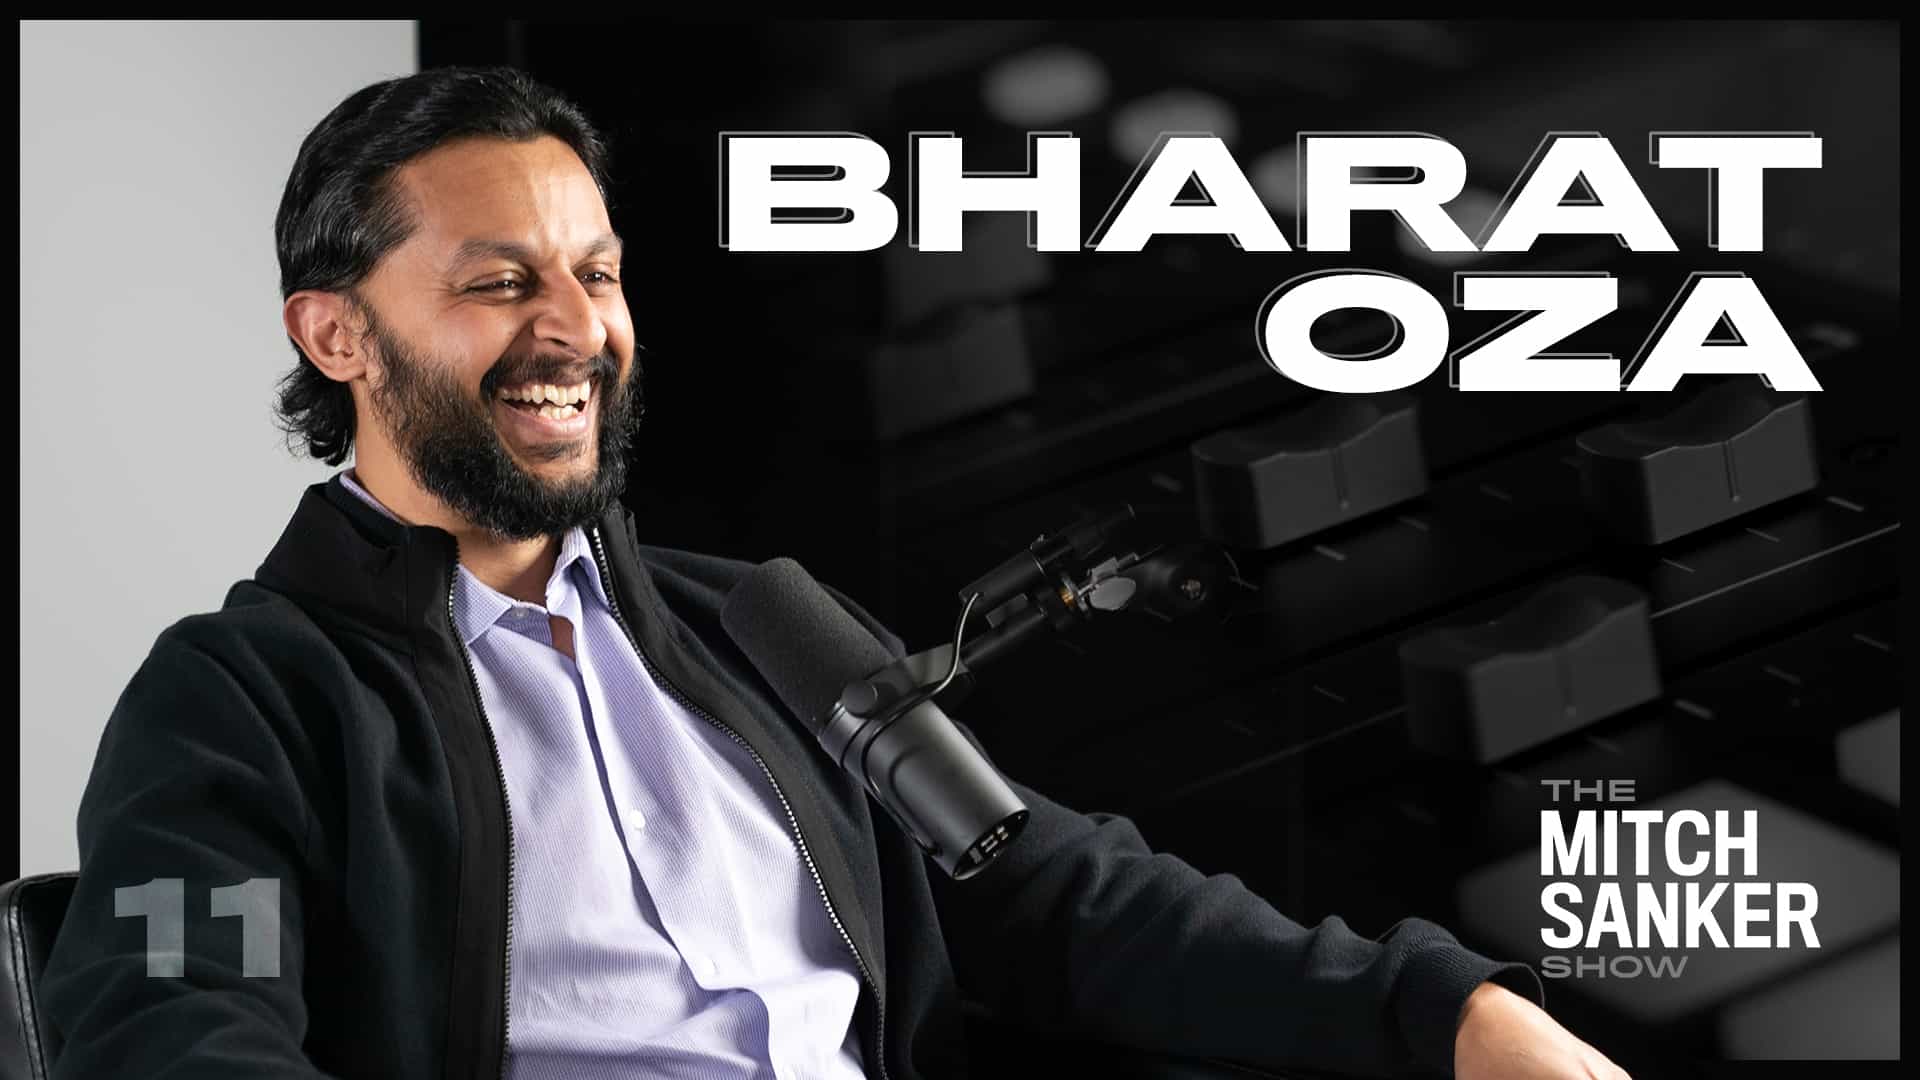 You are currently viewing The Mitch Sanker Show – Episode 11 featuring Bharat Oza